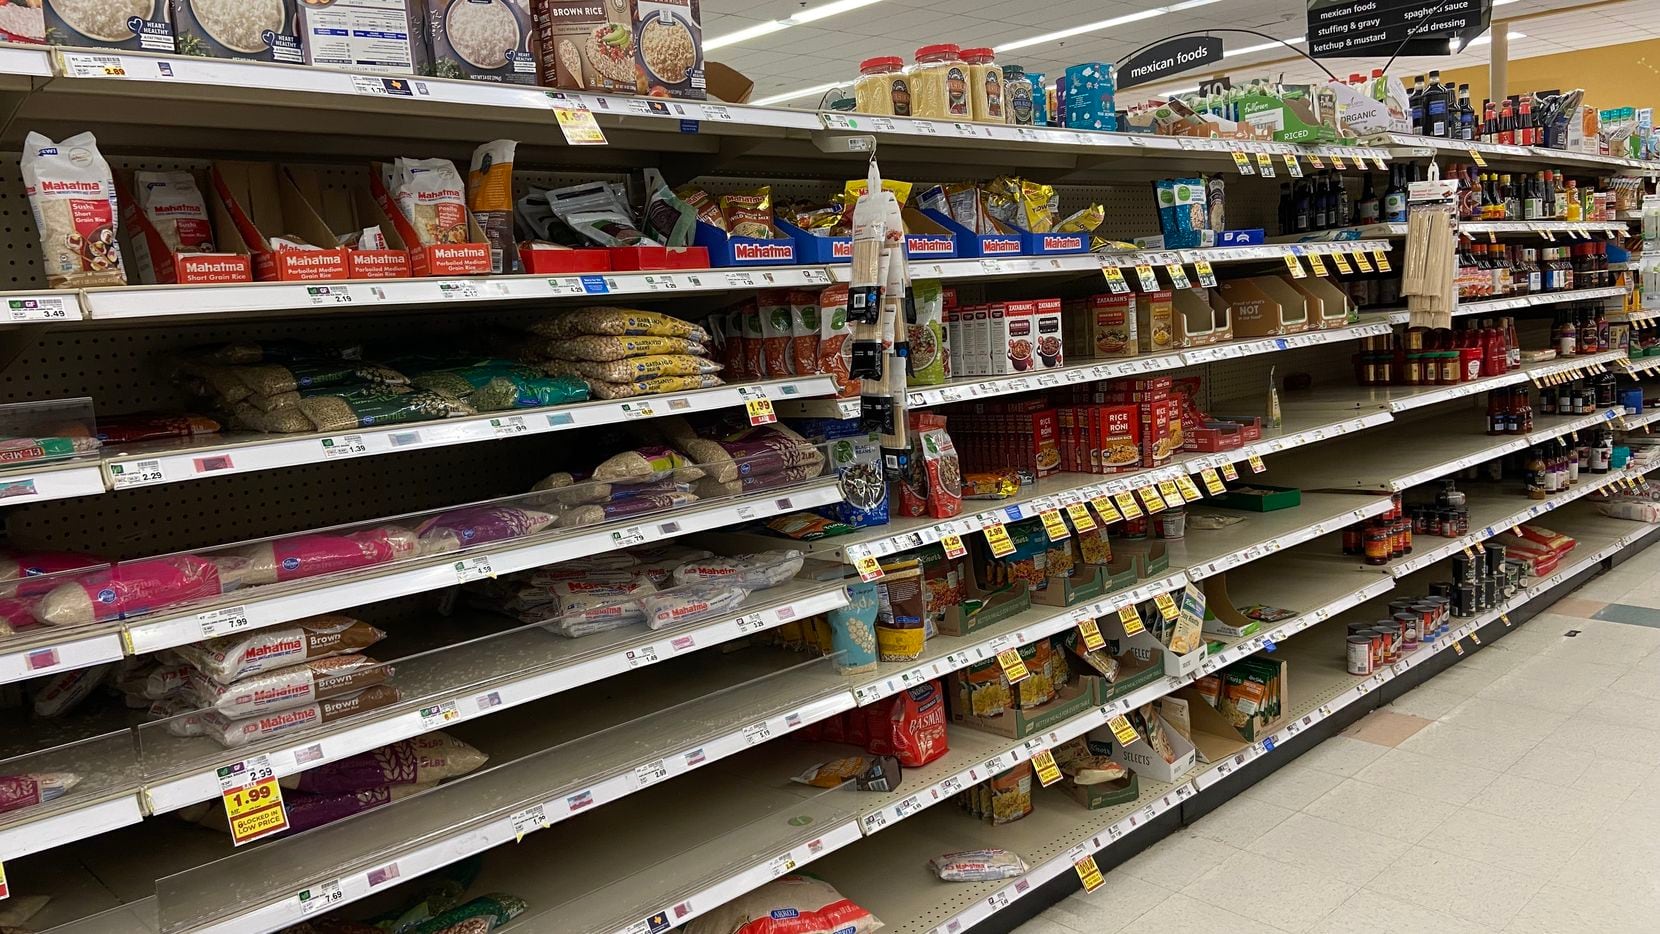 Shoppers this weekend may see some aisles like this one with shelves that aren't fully...